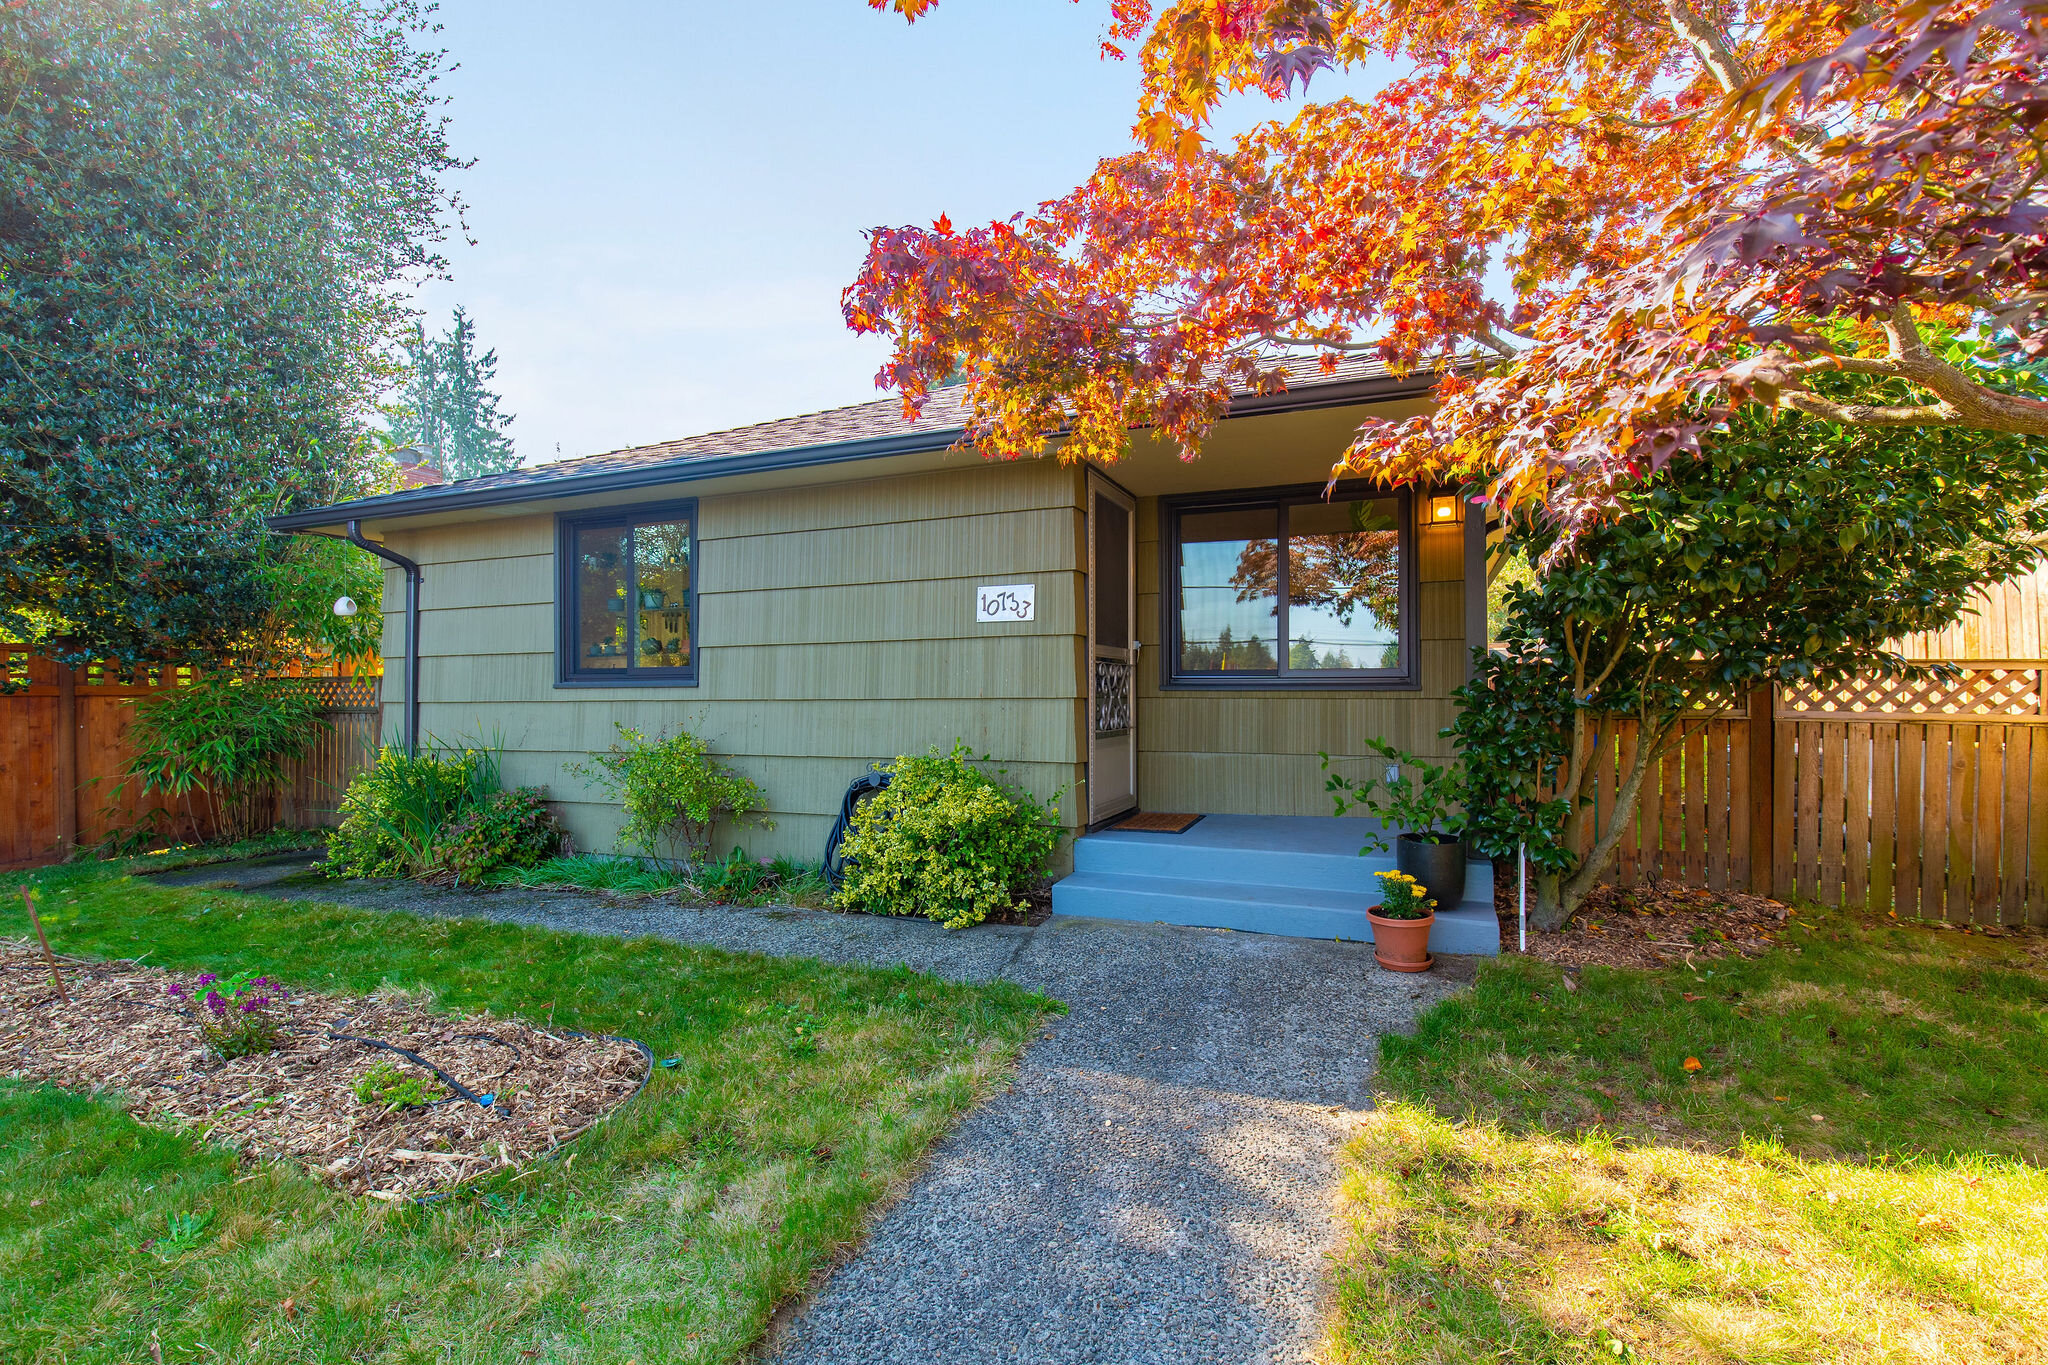  Welcome to this classic 1950’s craftsman bungalow. 